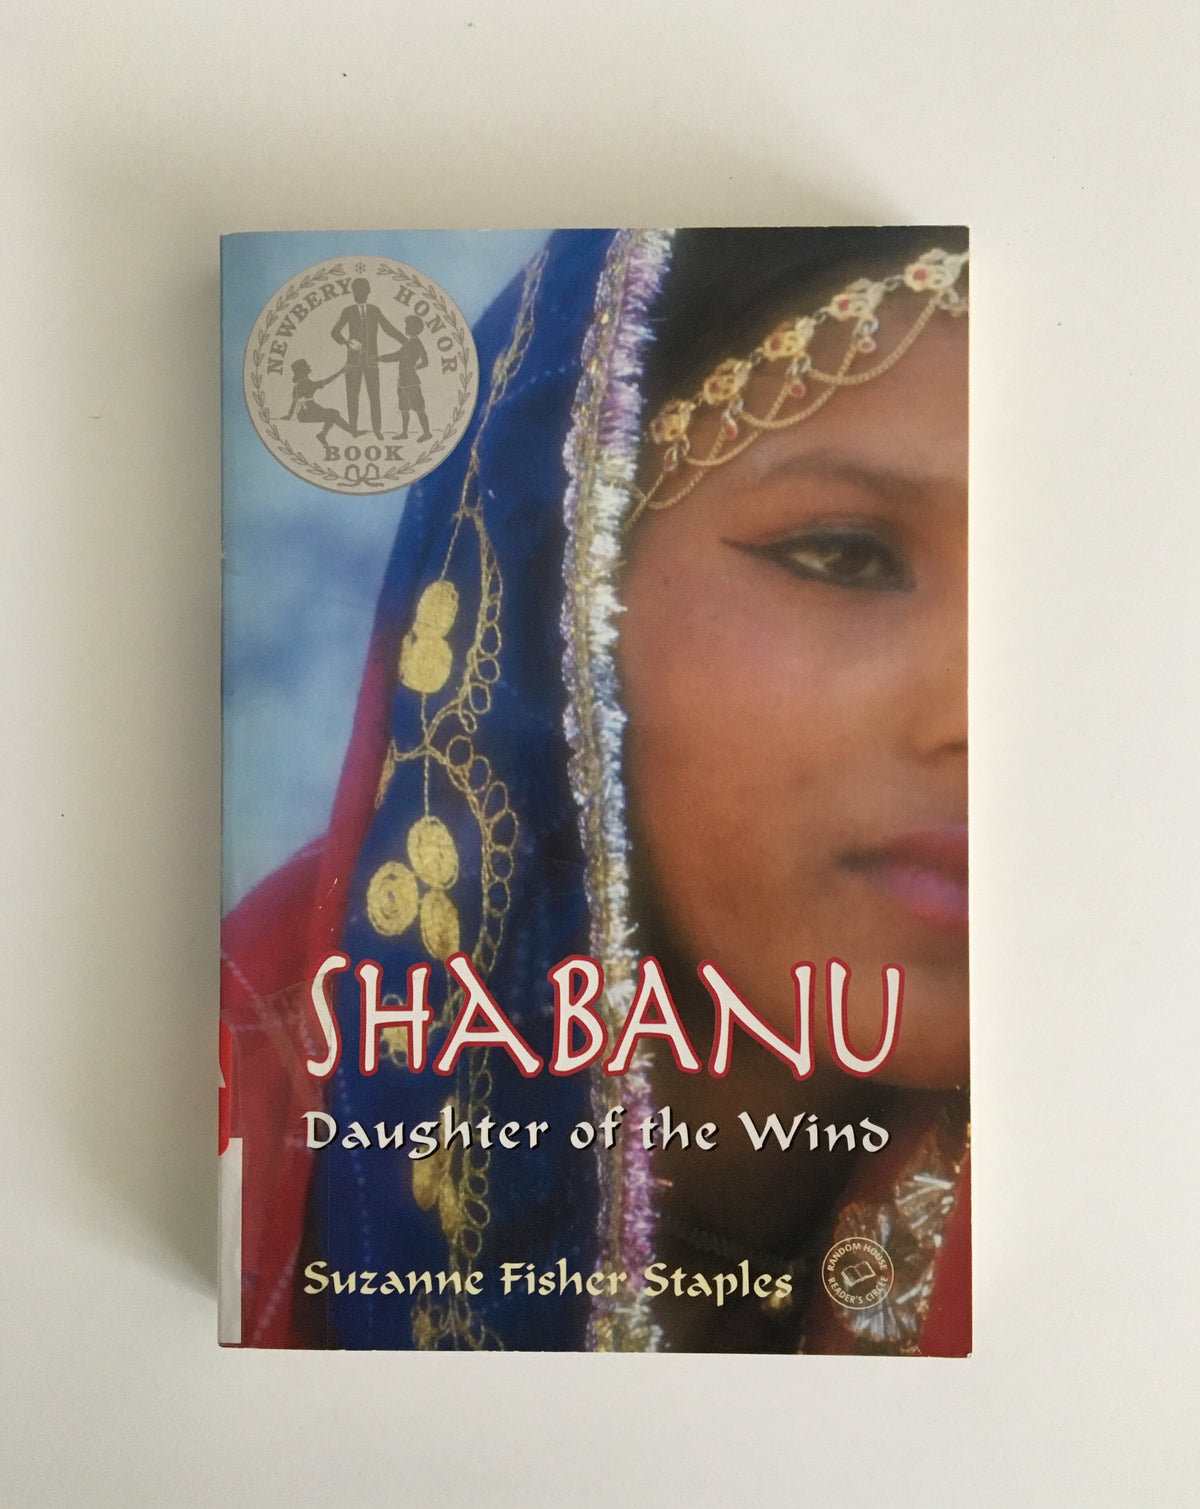 Shabanu by Susanne Fisher Staples